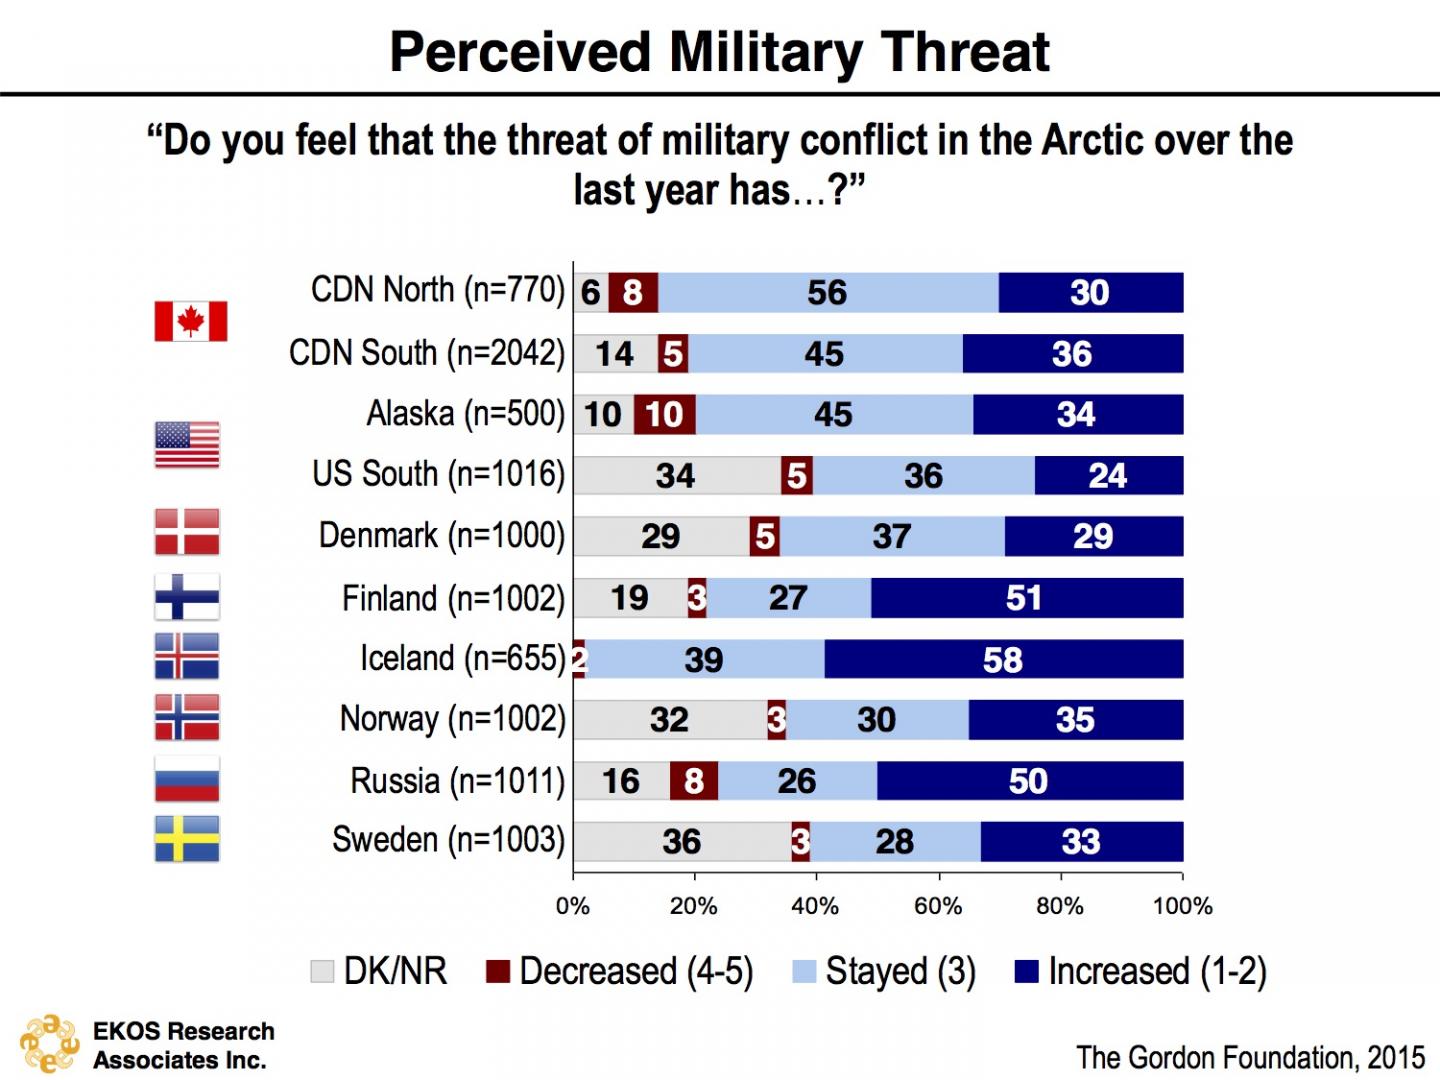 Perceived Military Threat in the Arctic